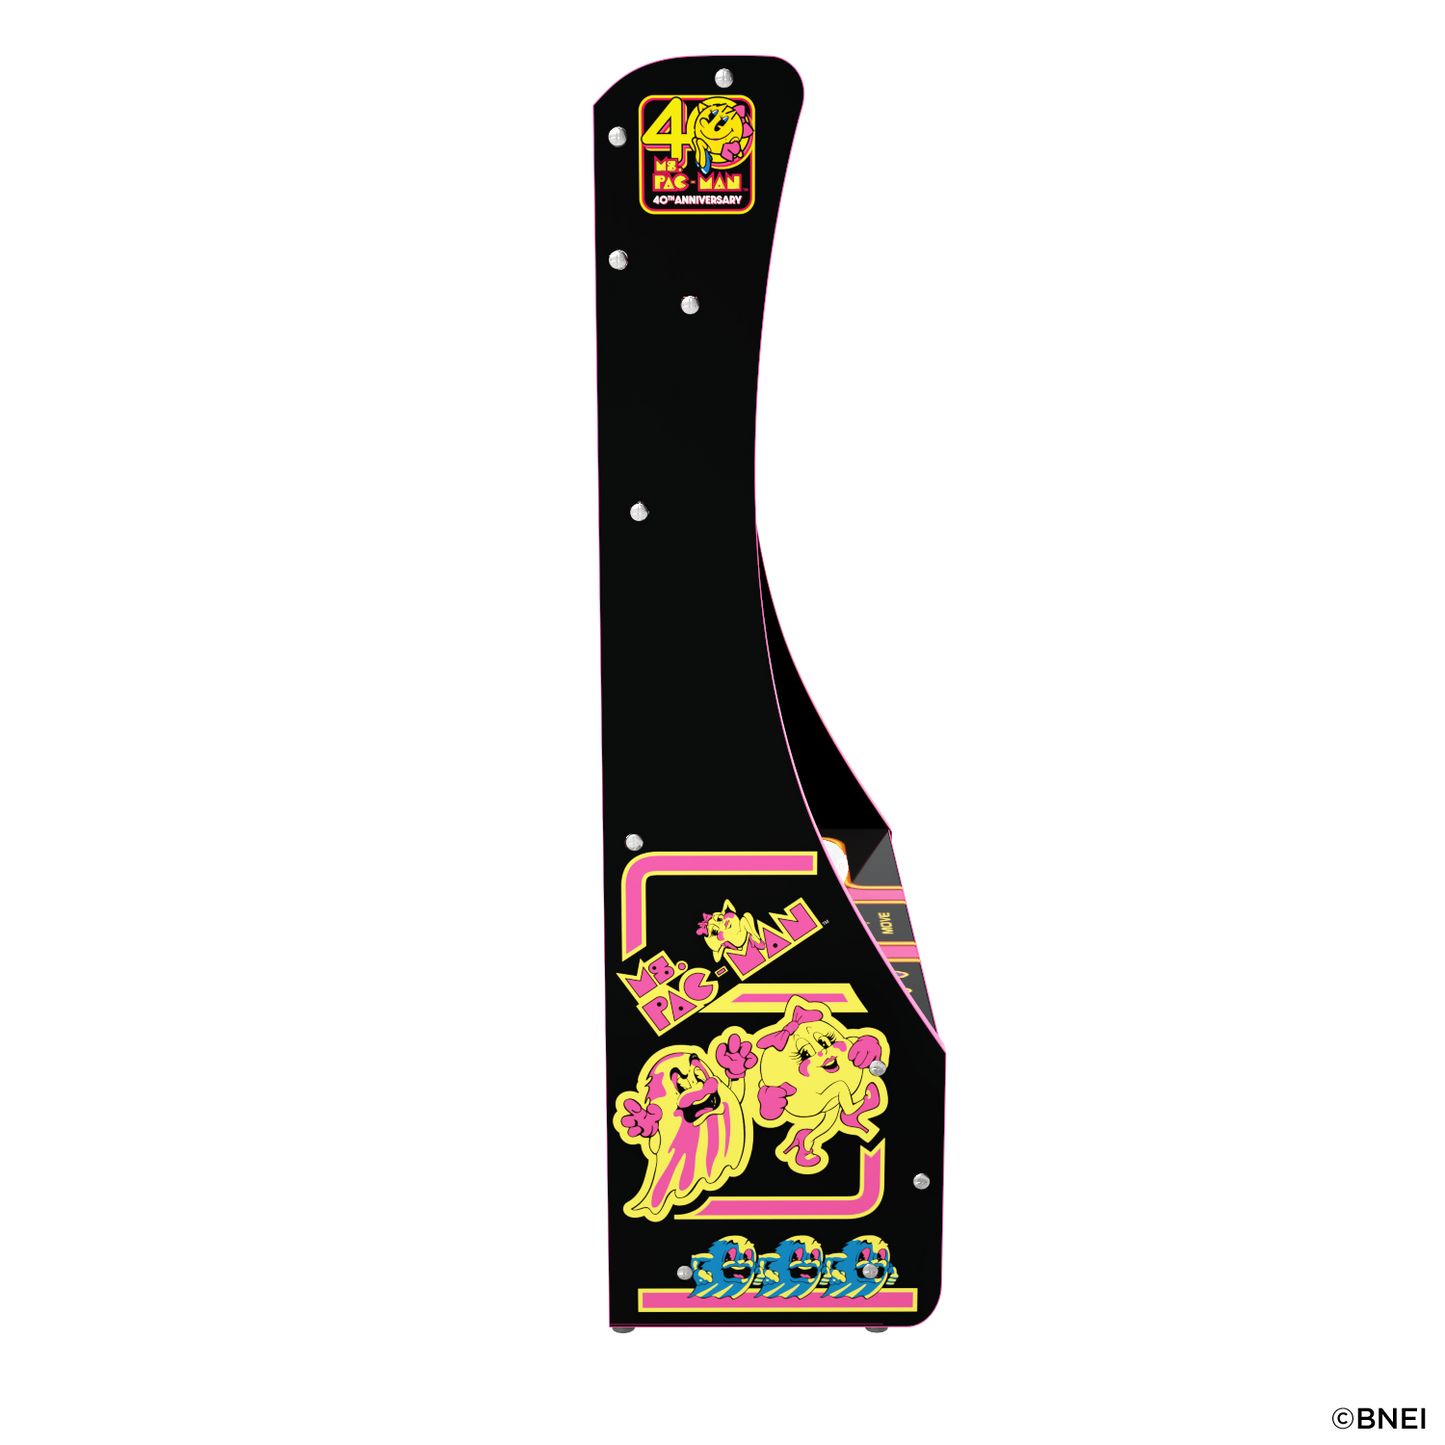 Ms. PAC-MAN™ Partycade™ - 40th Anniversary Black Edition - 10 Games